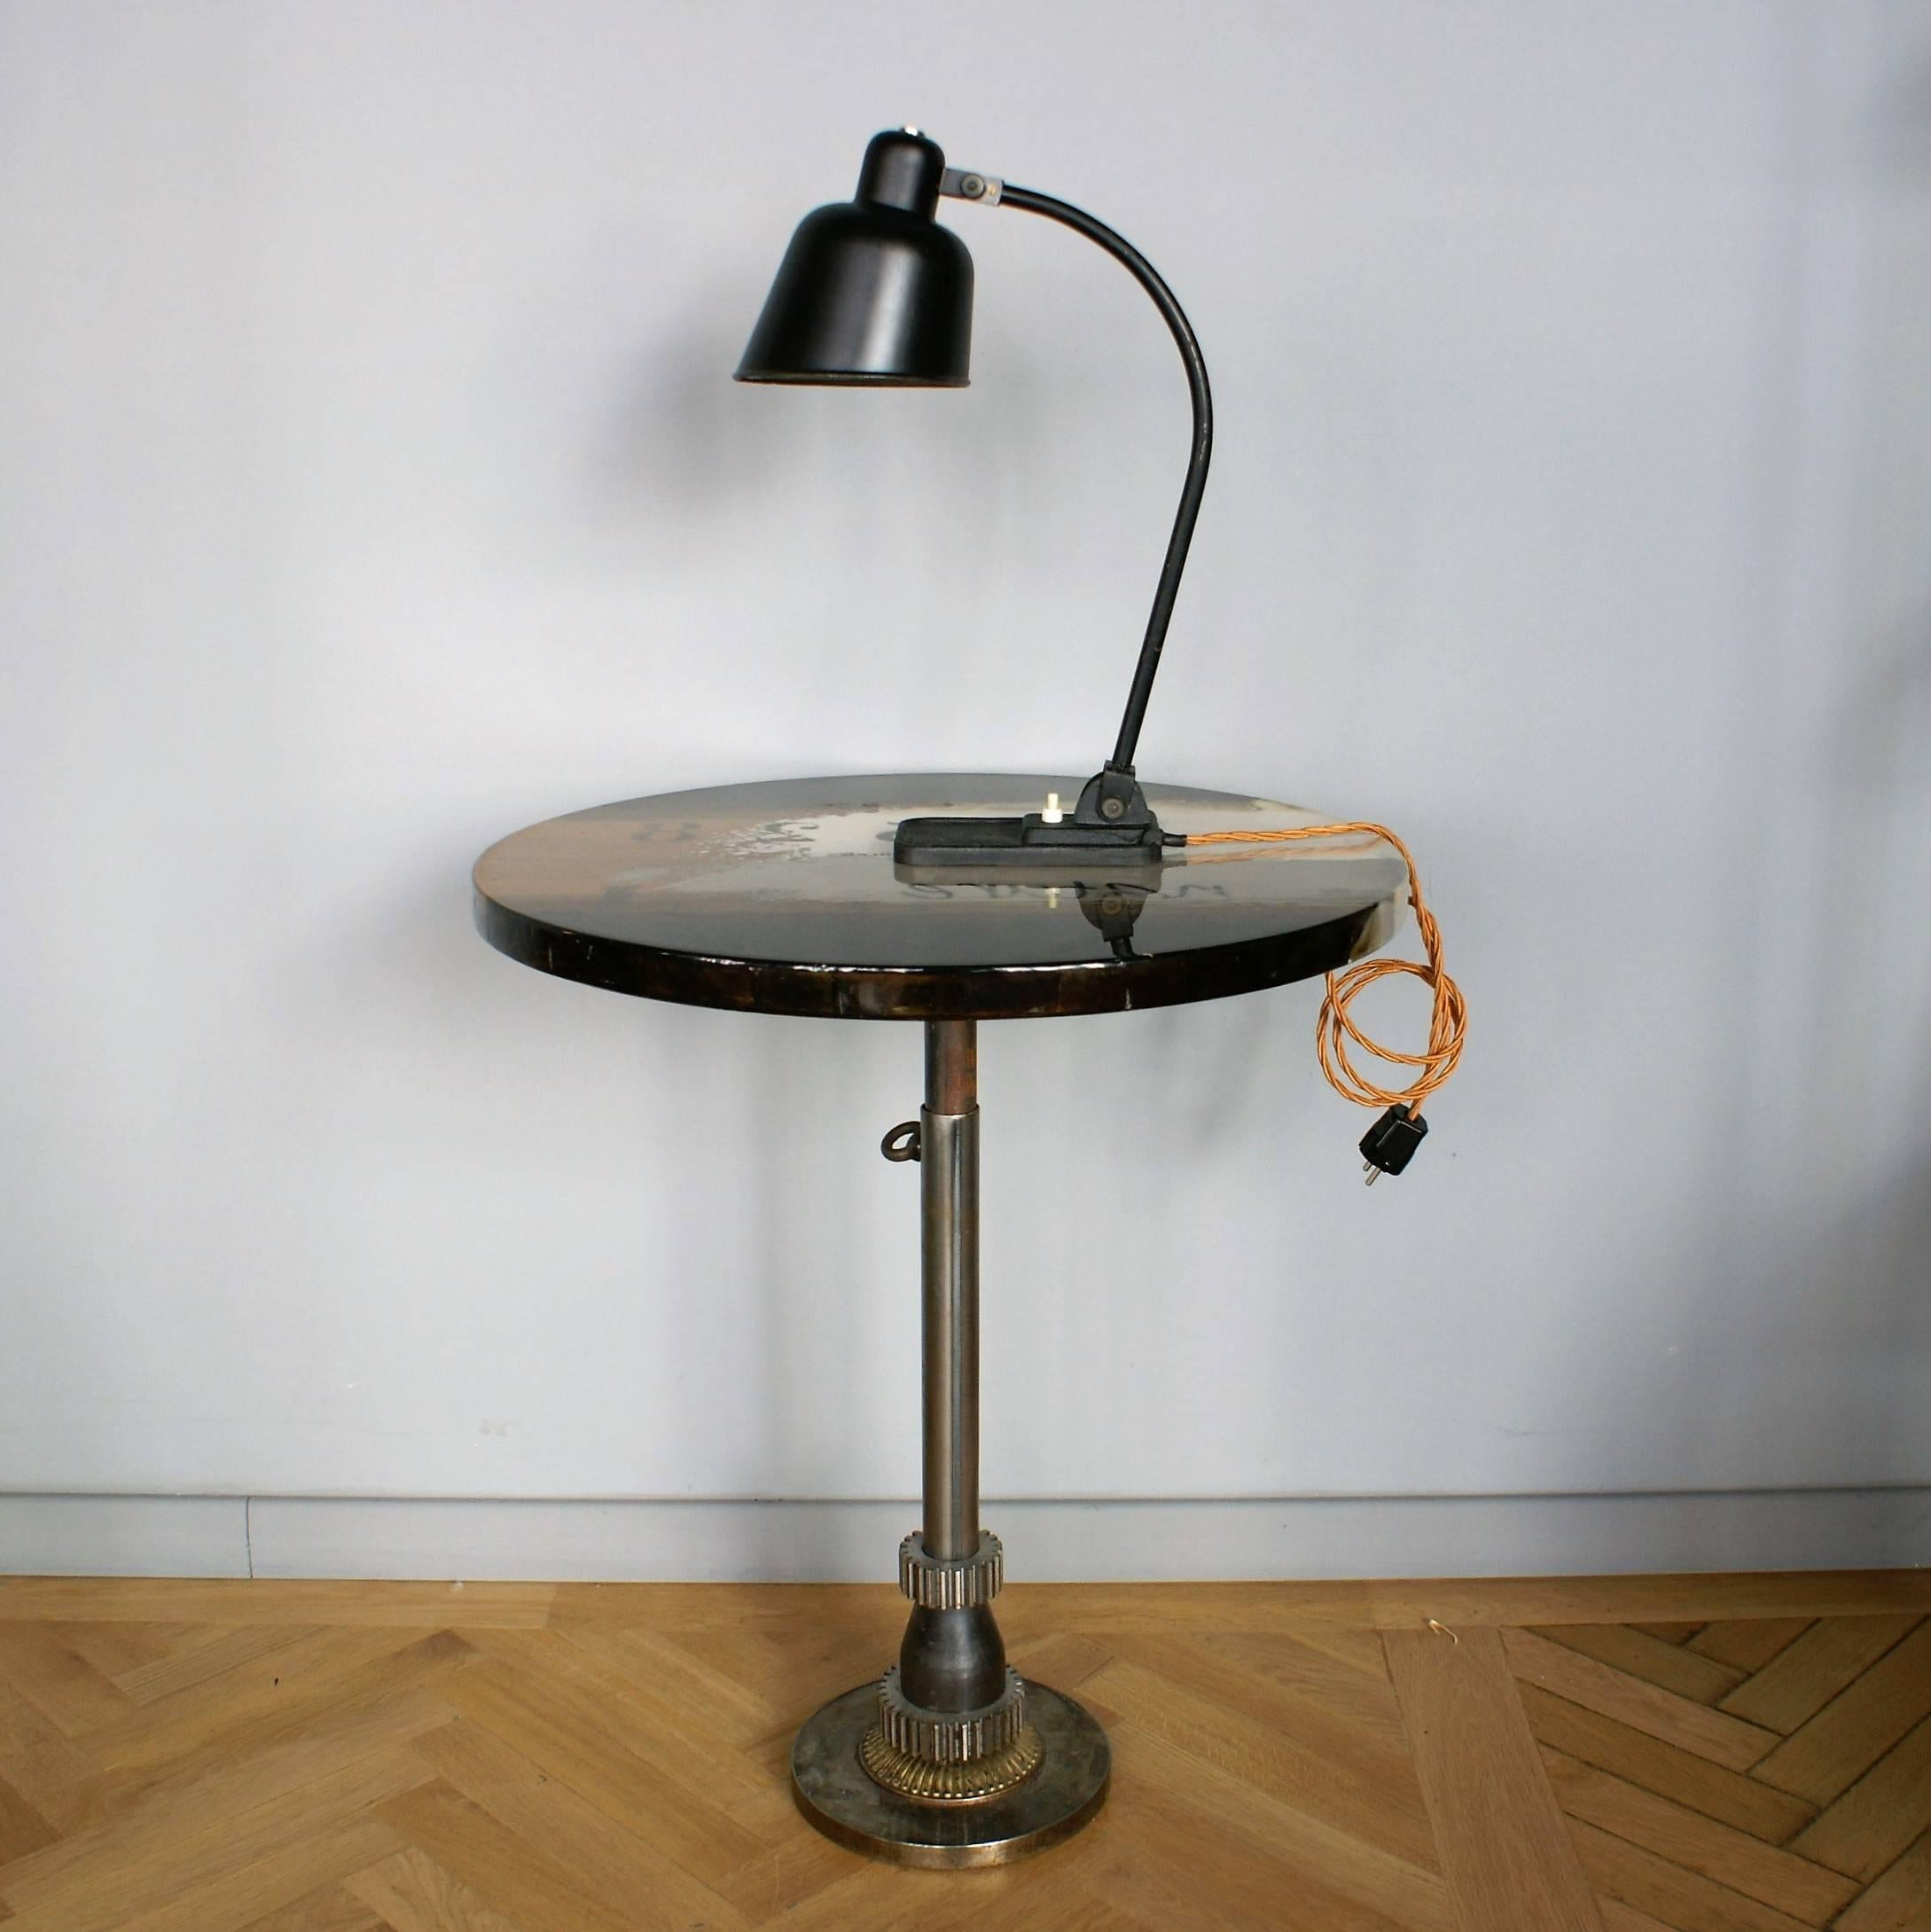 Iconic Bauhaus desk lamp designed by Christian Dell in original condition.
Adjustable arched tubular steel stem and an adjustable black lacquered alloy lamp shade.

Staatliches Bauhaus, commonly known simply as Bauhaus, was founded by Walter